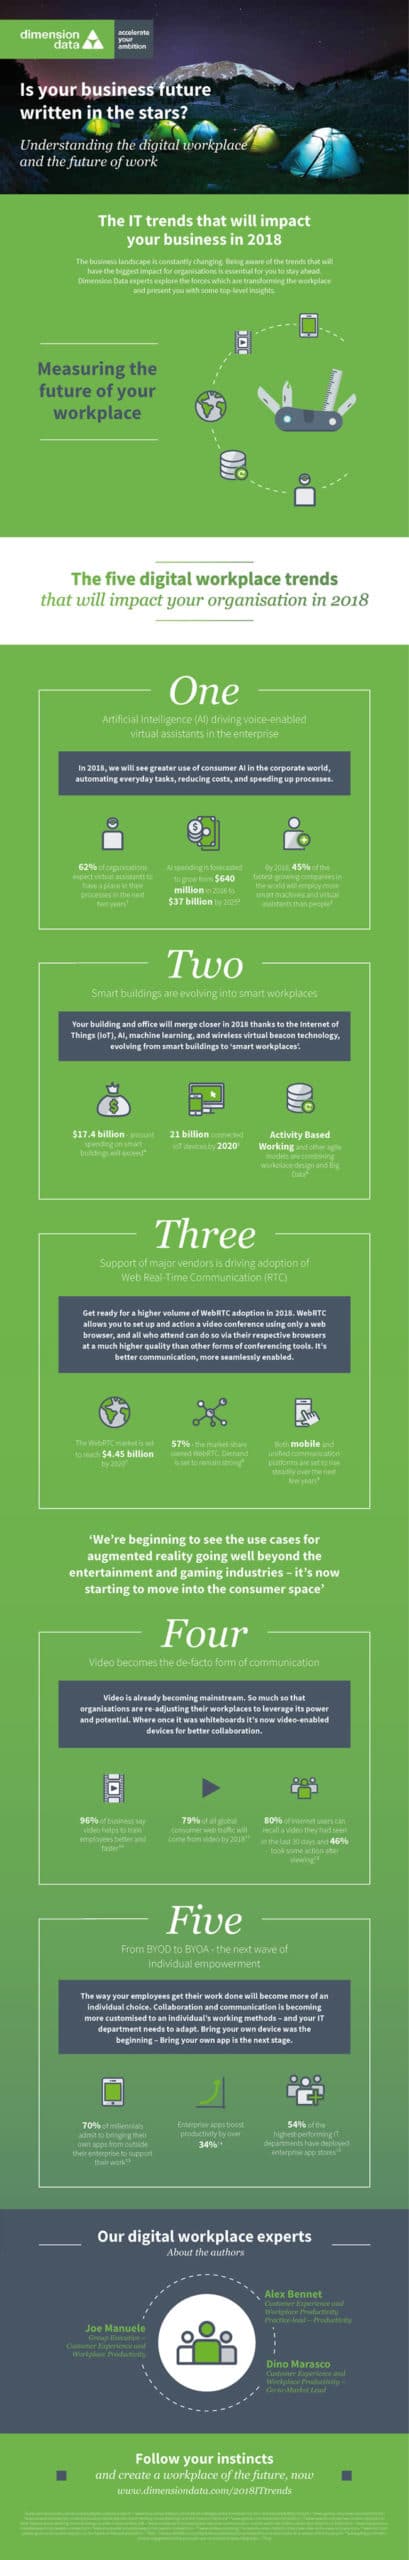 AI (virtual agents), smart buildings (with AI and IoT), Web RTC, video and BYOA (Bring Your Own App) in the top IT trends for the digital smart workplace according to Dimension Data - full infographic in PDF